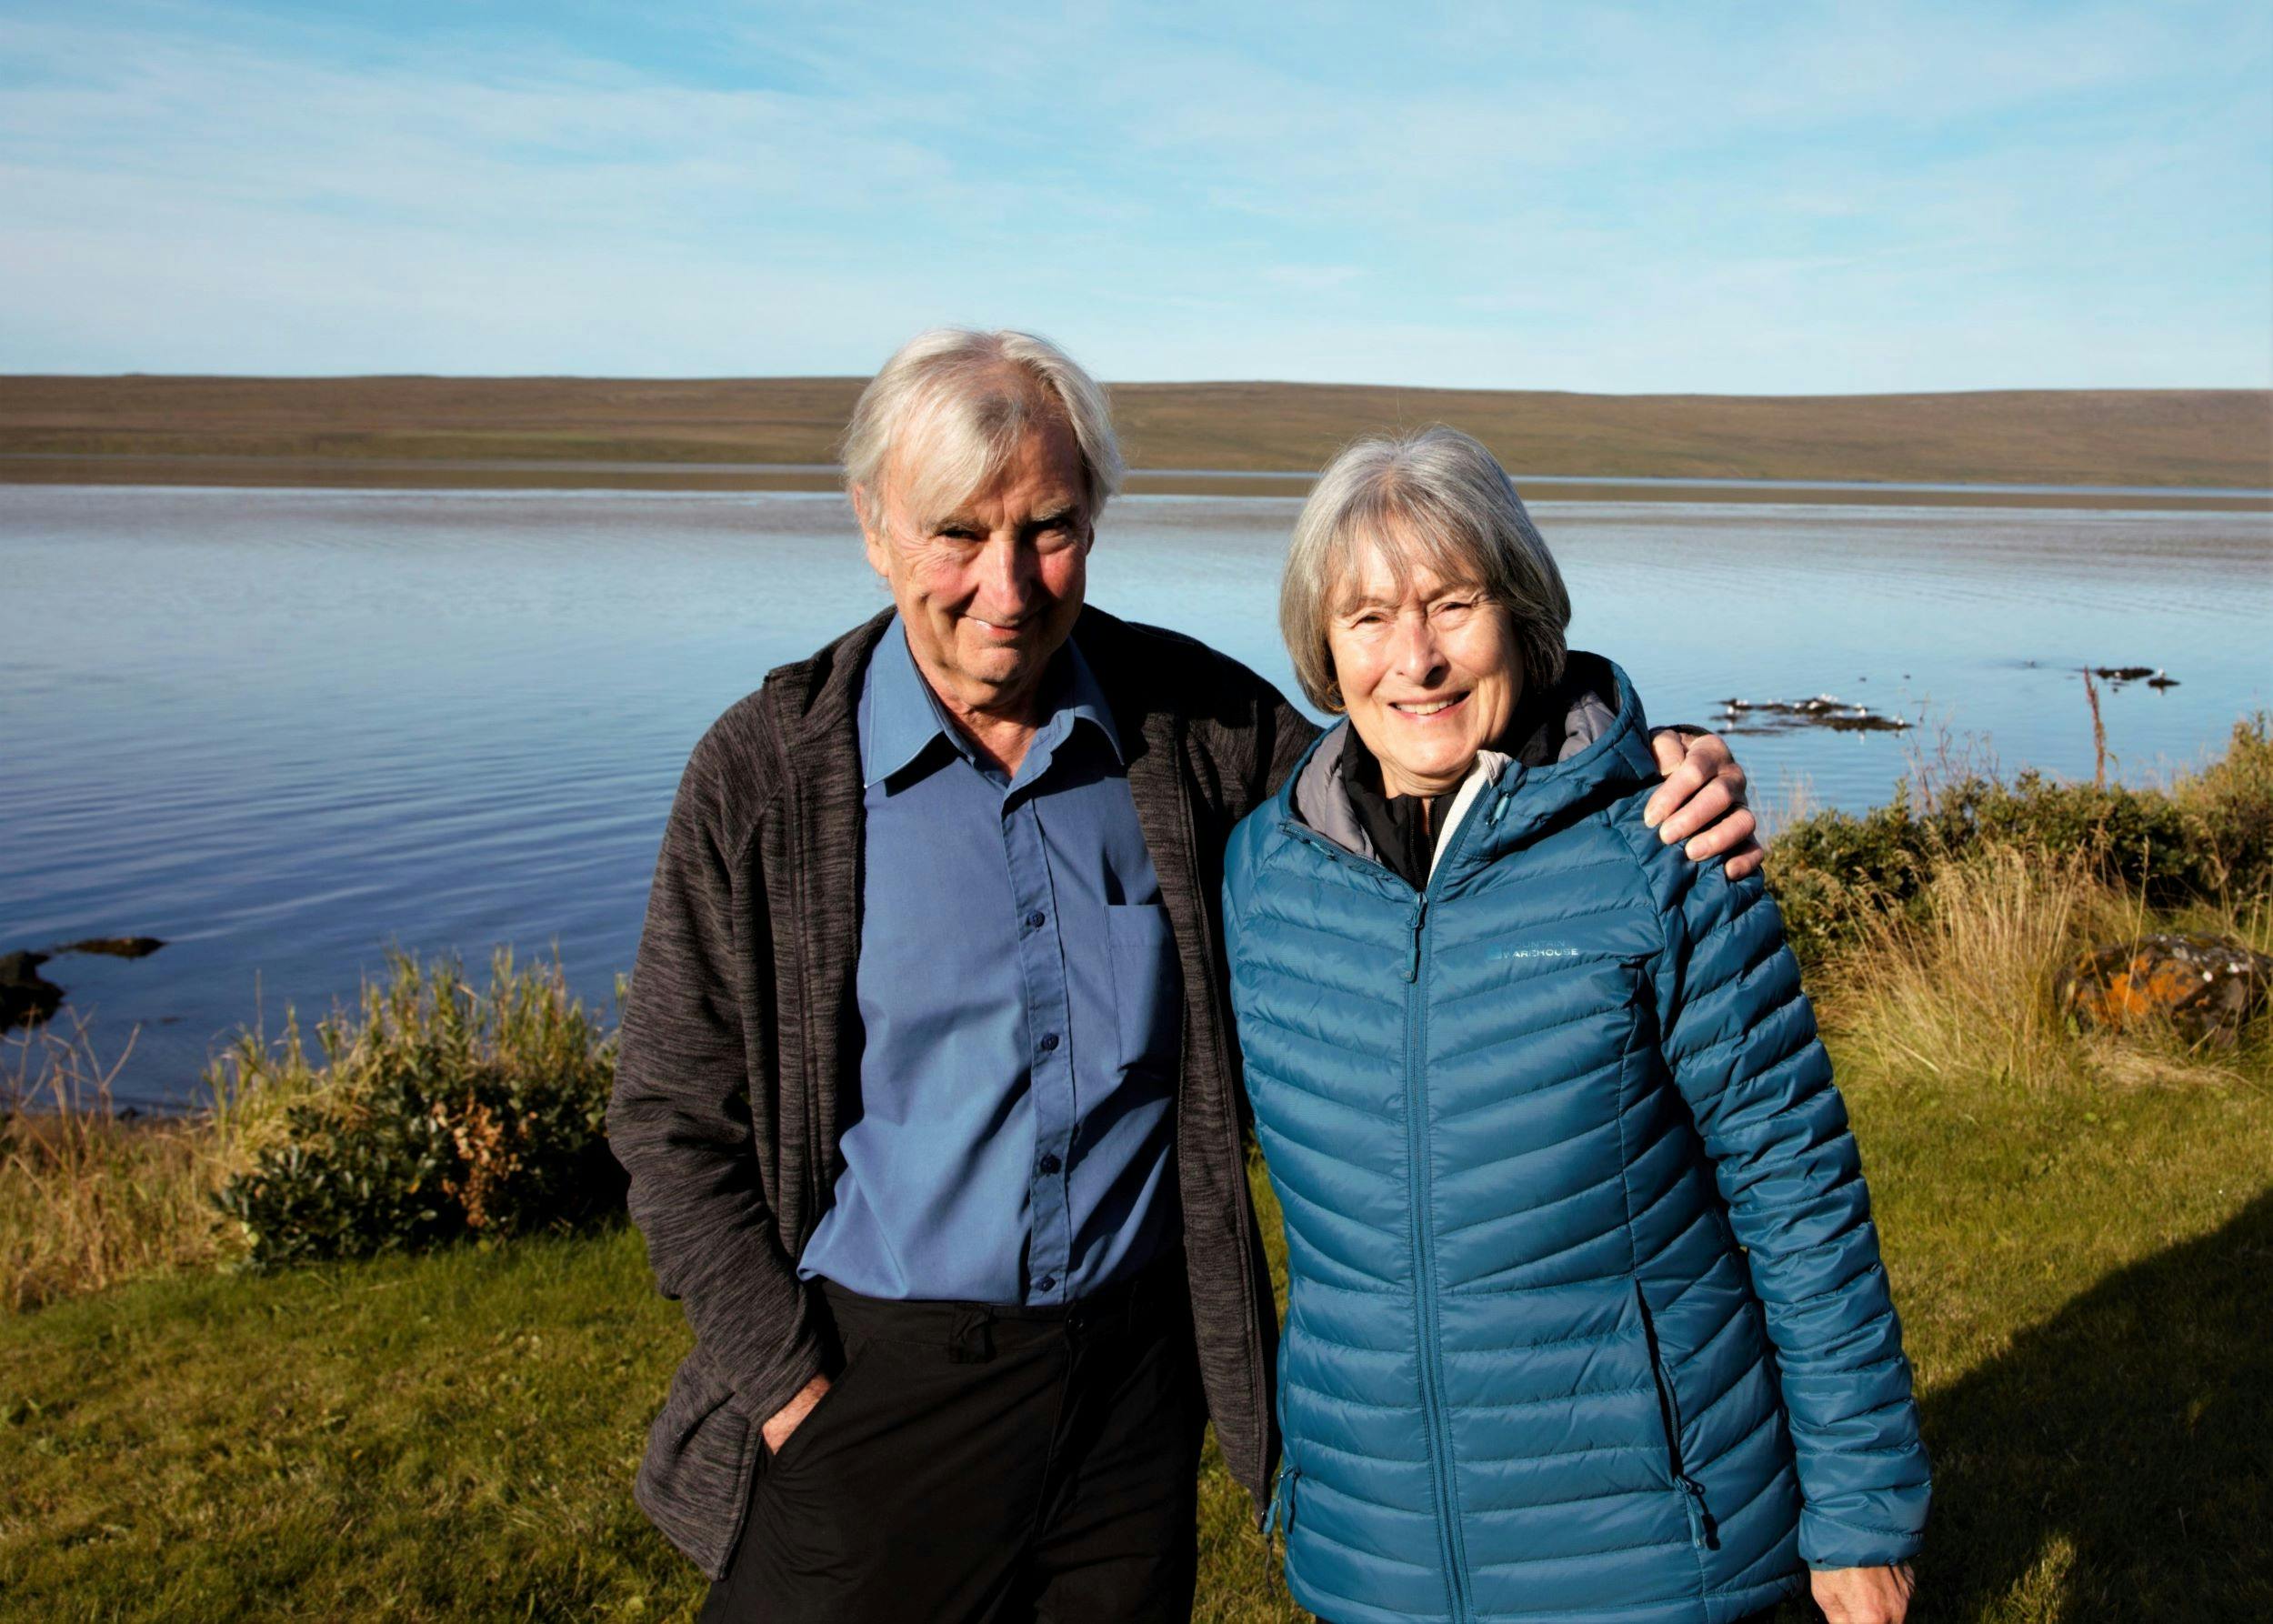 Elderly couple standing on a meadow, visible in the background is the ocean and some birds , the sun is shining